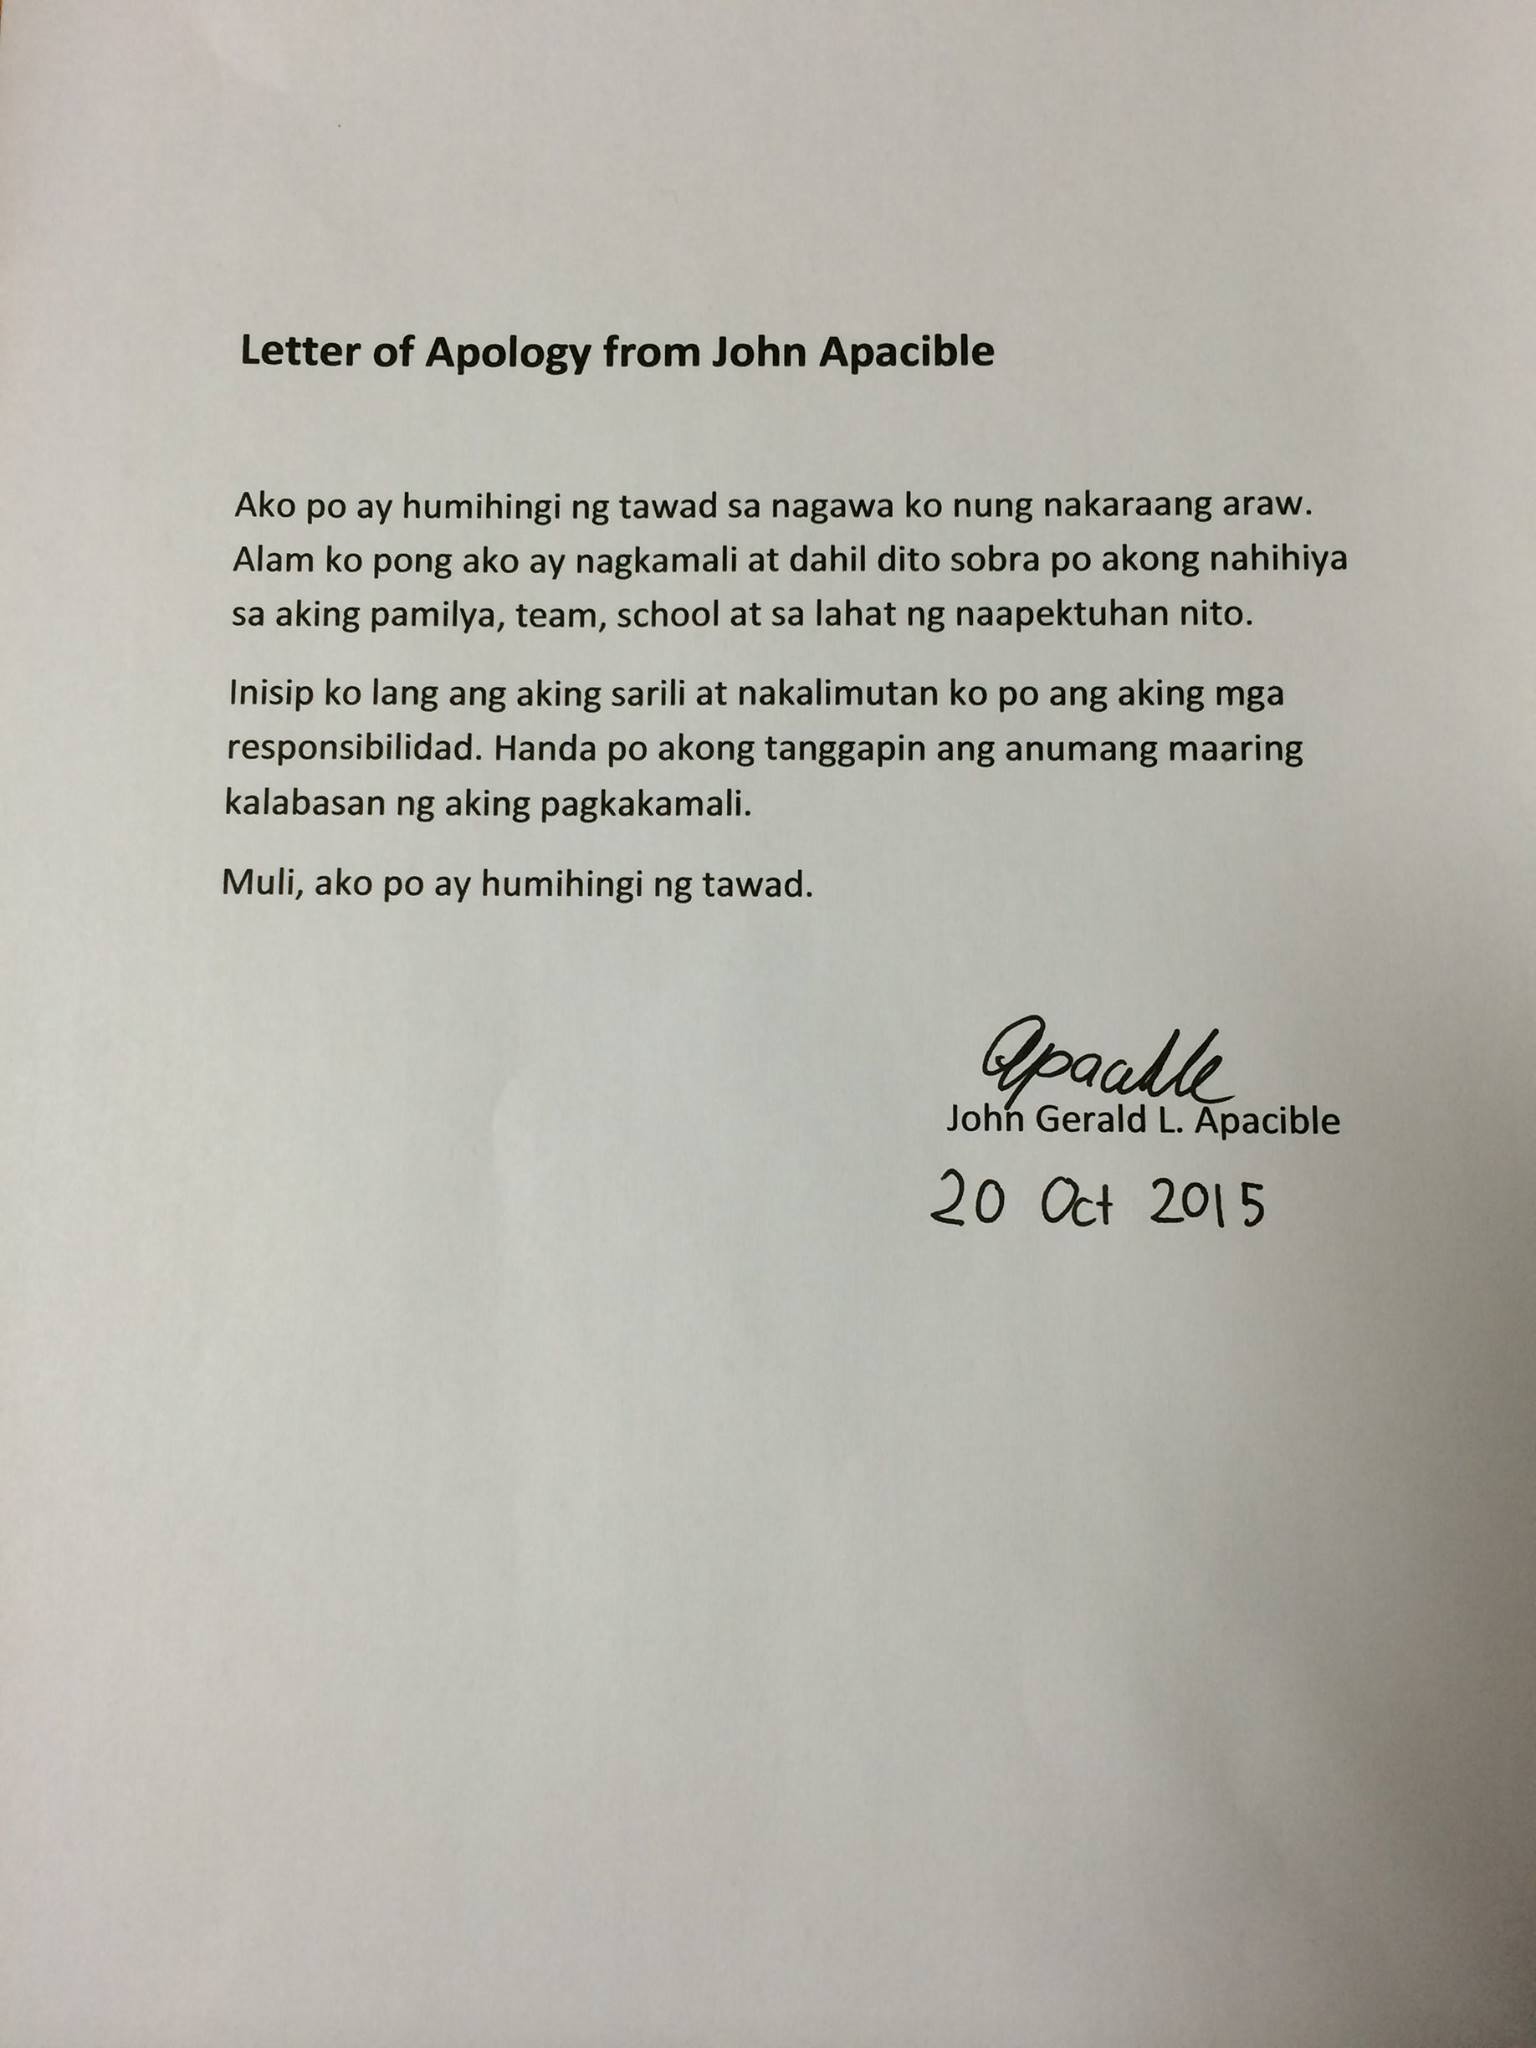 LOOK Suspended Ateneo forward John Apacible writes letter